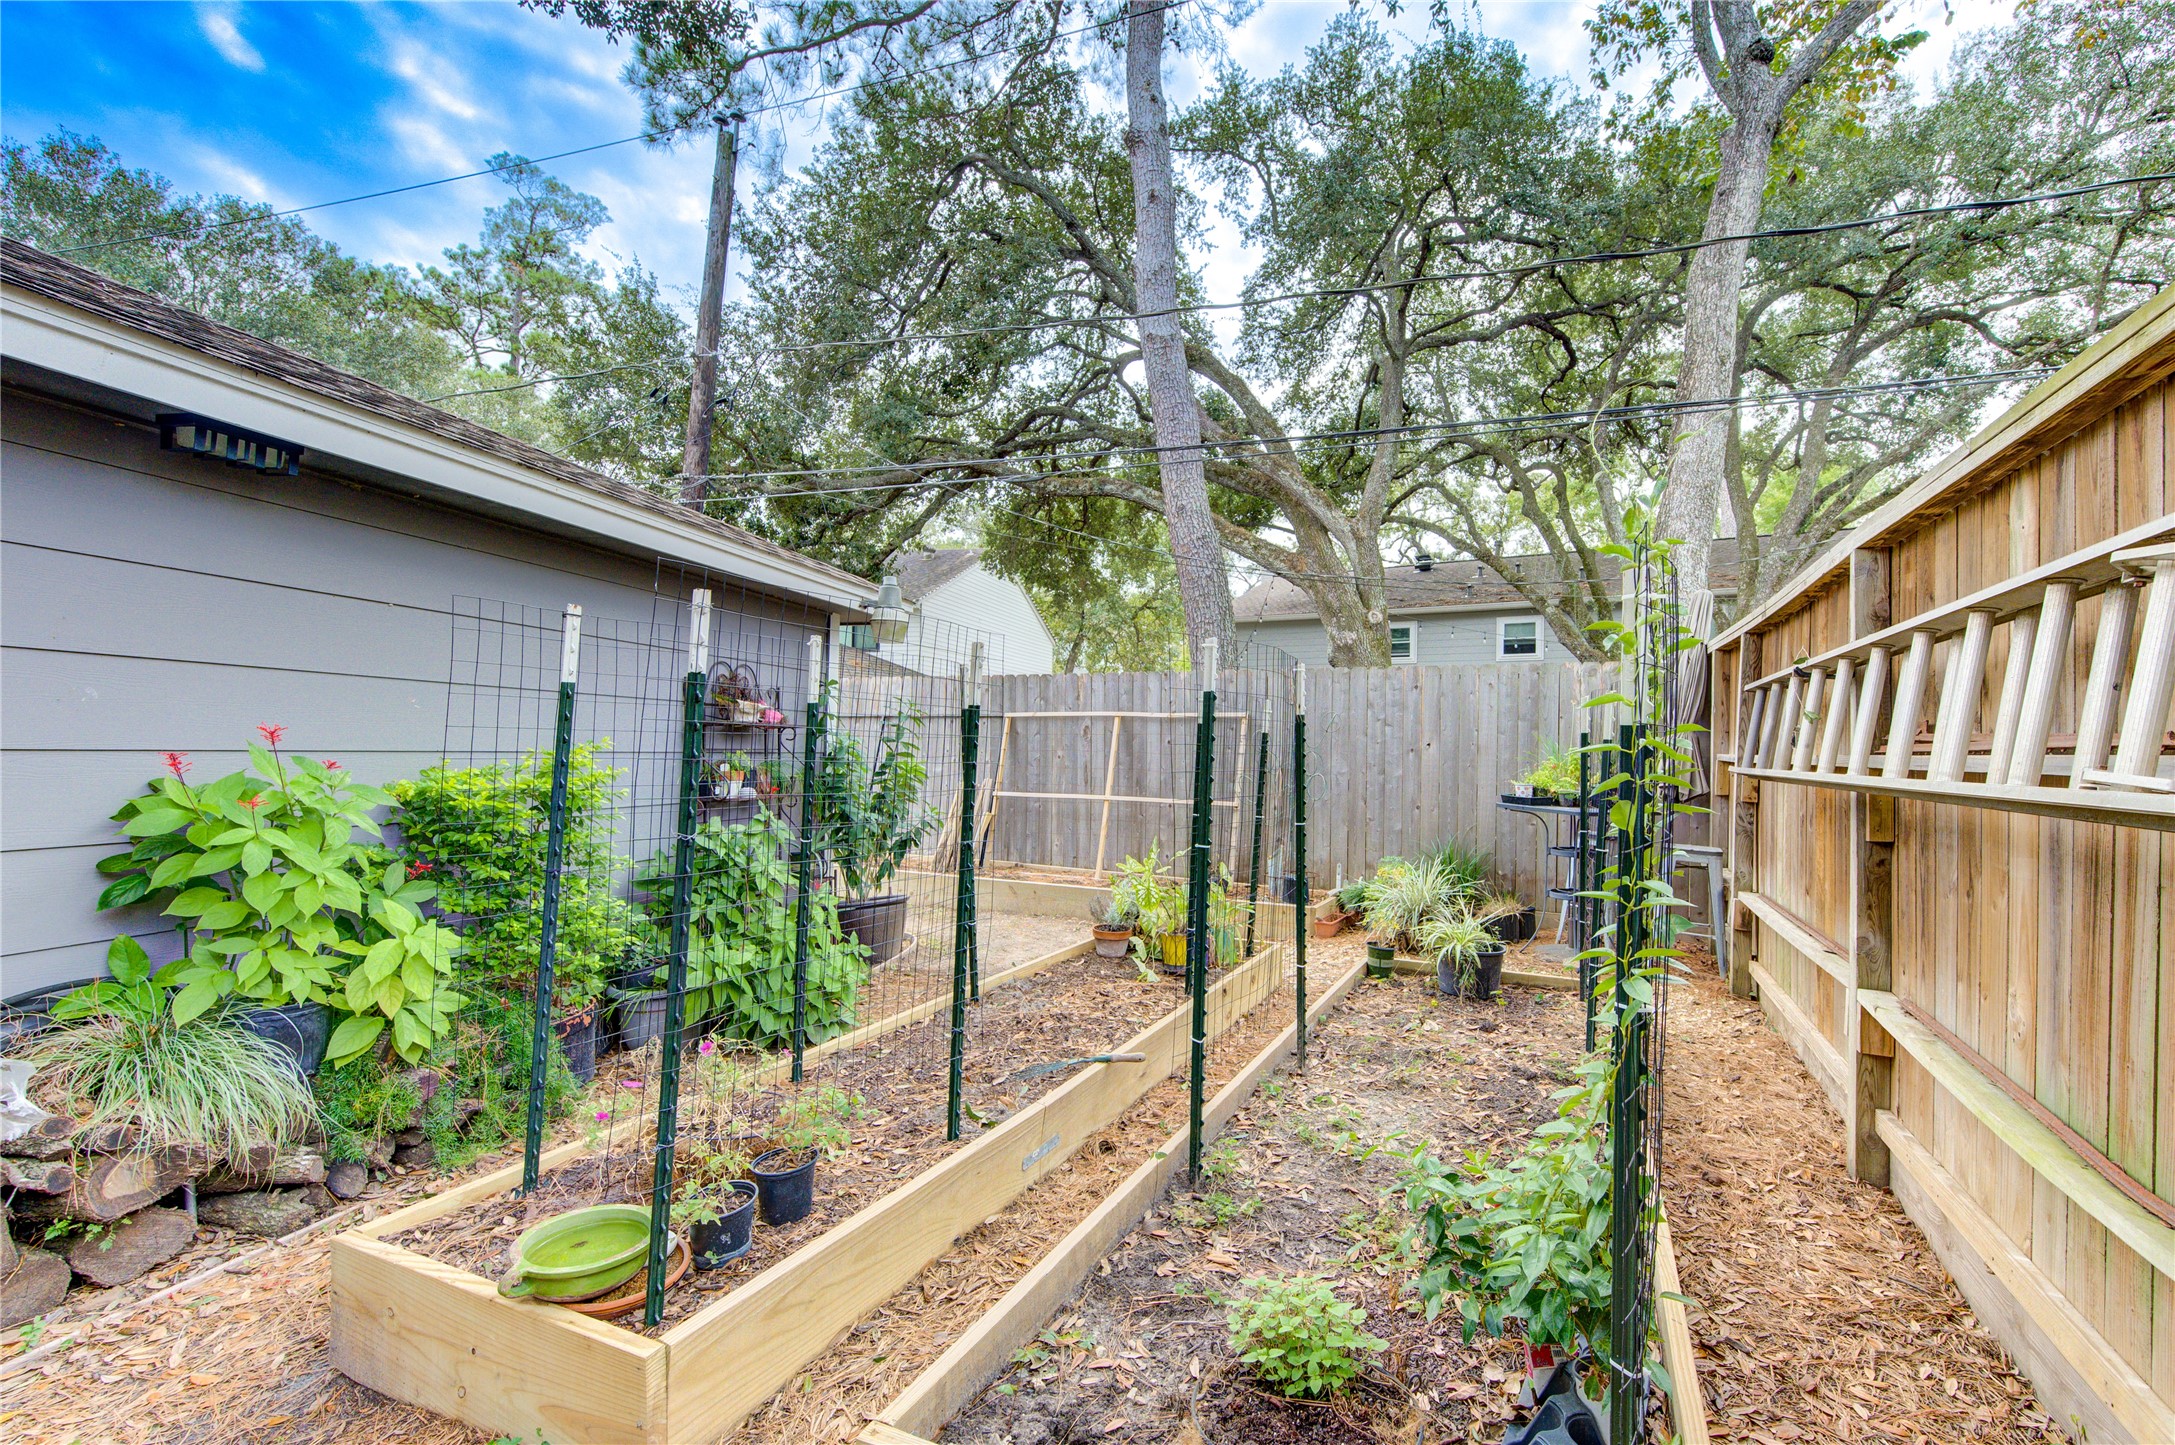 With so much green space in the backyard, the Seller has designed a vegetable garden next to the garage. Grow your own vegetables at home!